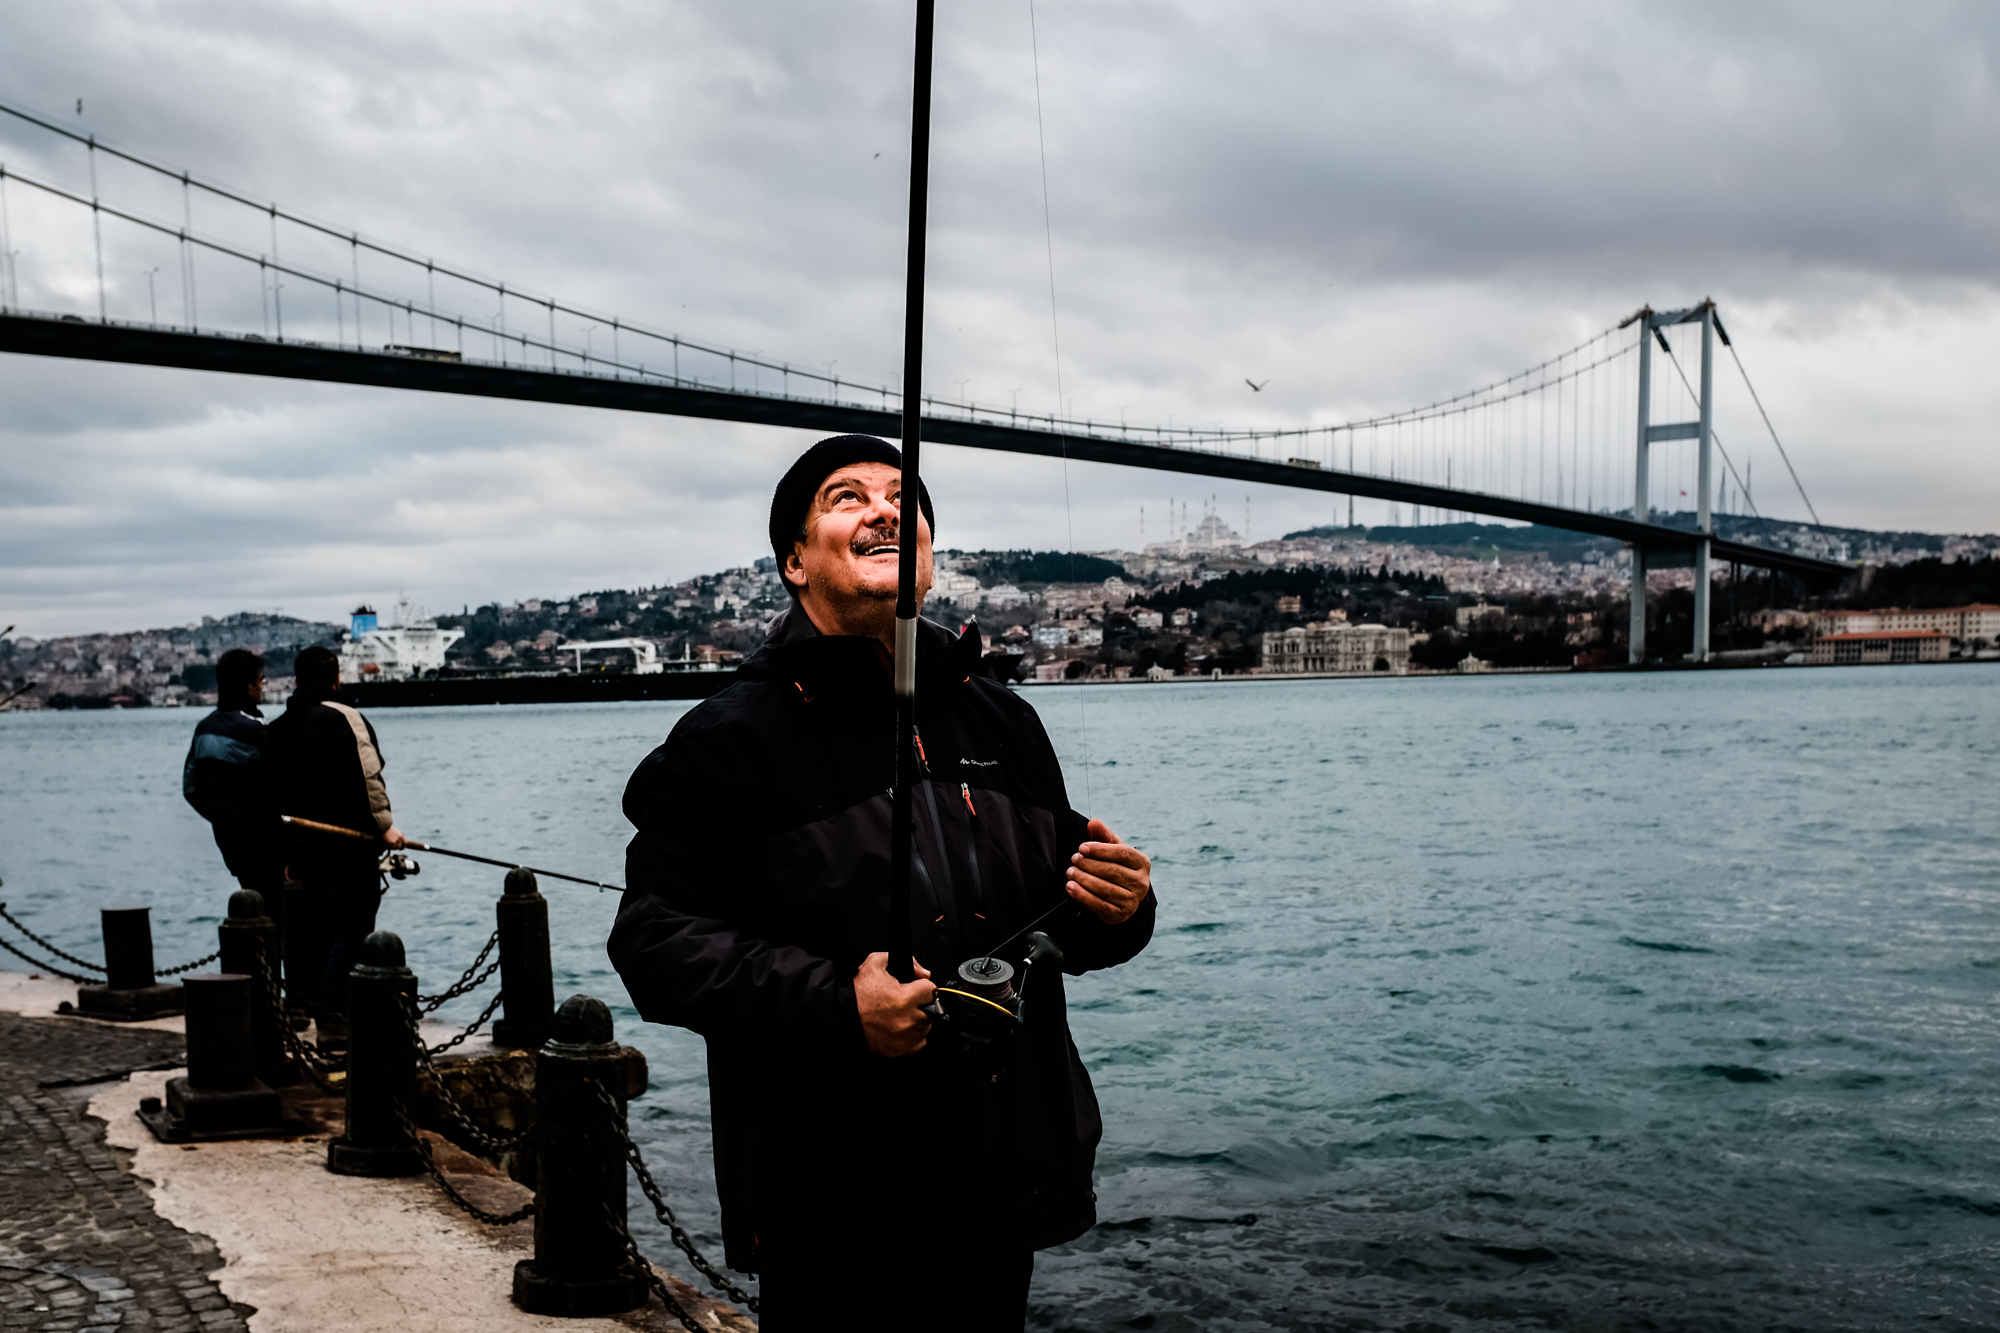 A fisherman on the banks of the Bosporus River in Istanbul, Turkey